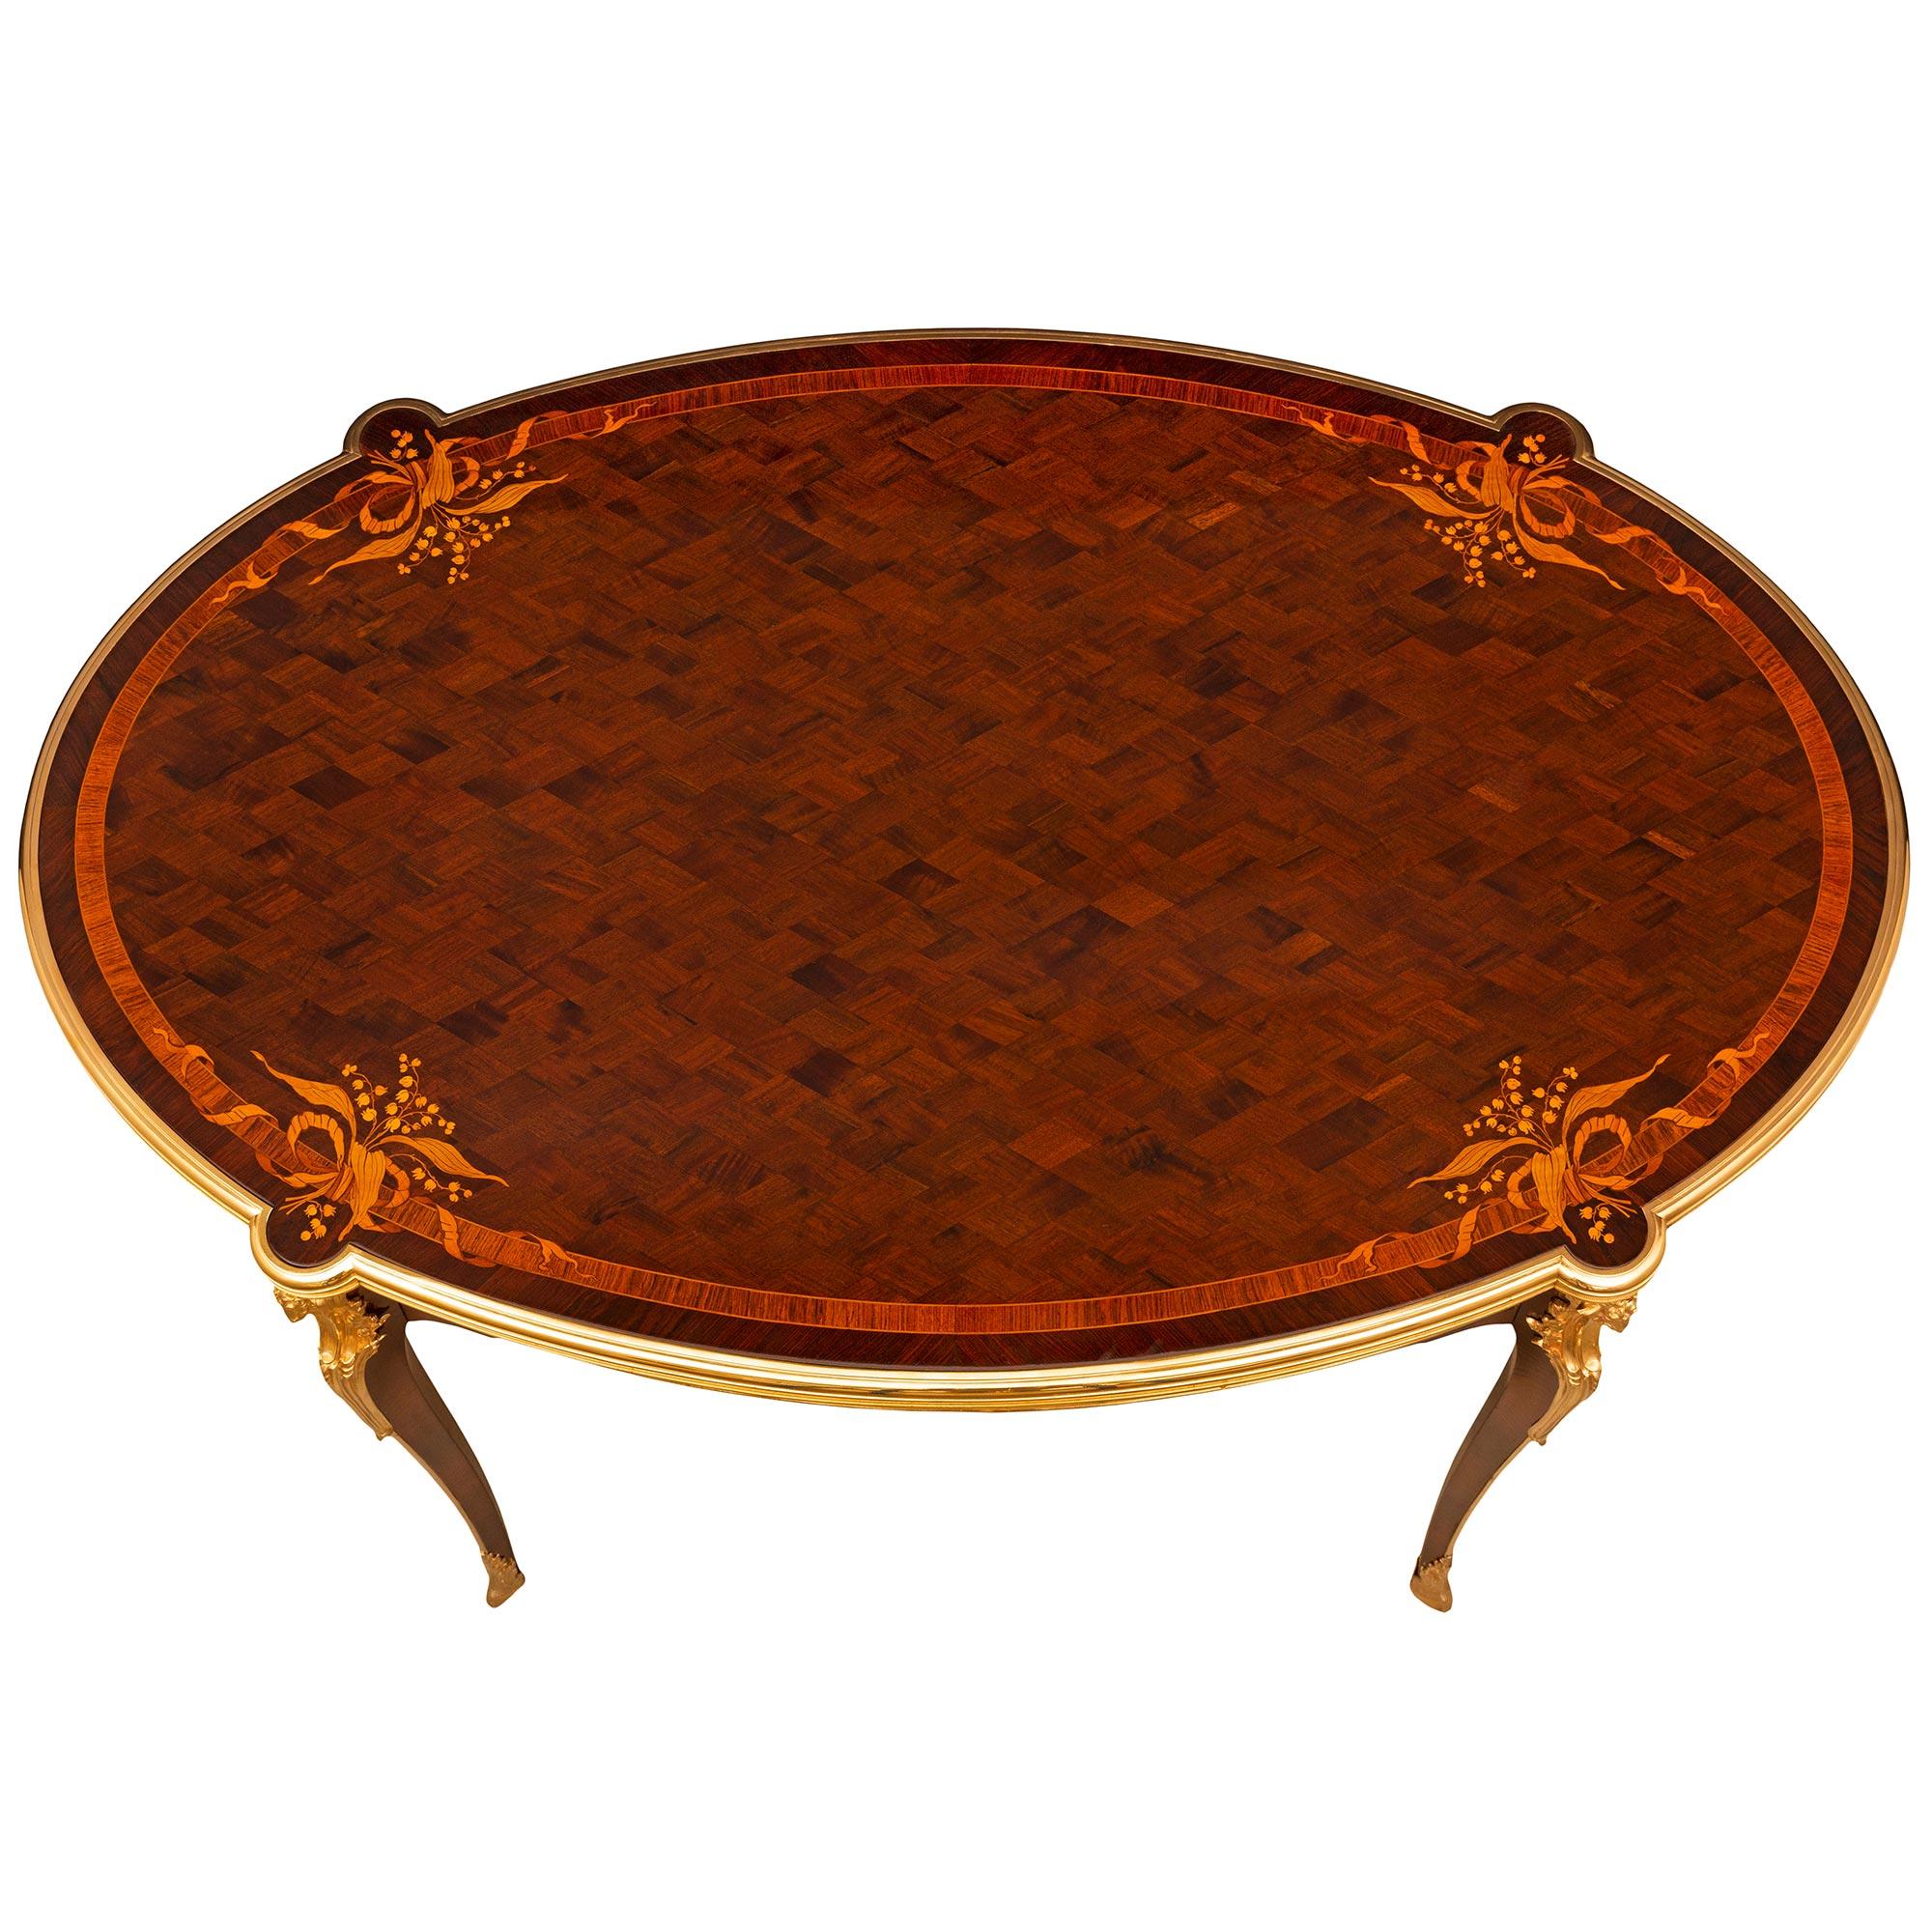 A stunning and extremely high quality French 19th century Louis XV st. Mahogany, Kingwood and ormolu side table/desk signed Krieger. The oval table is raised by elegant cabriole legs with fitted ormolu hoof, acanthus leaf sabots, and displaying a